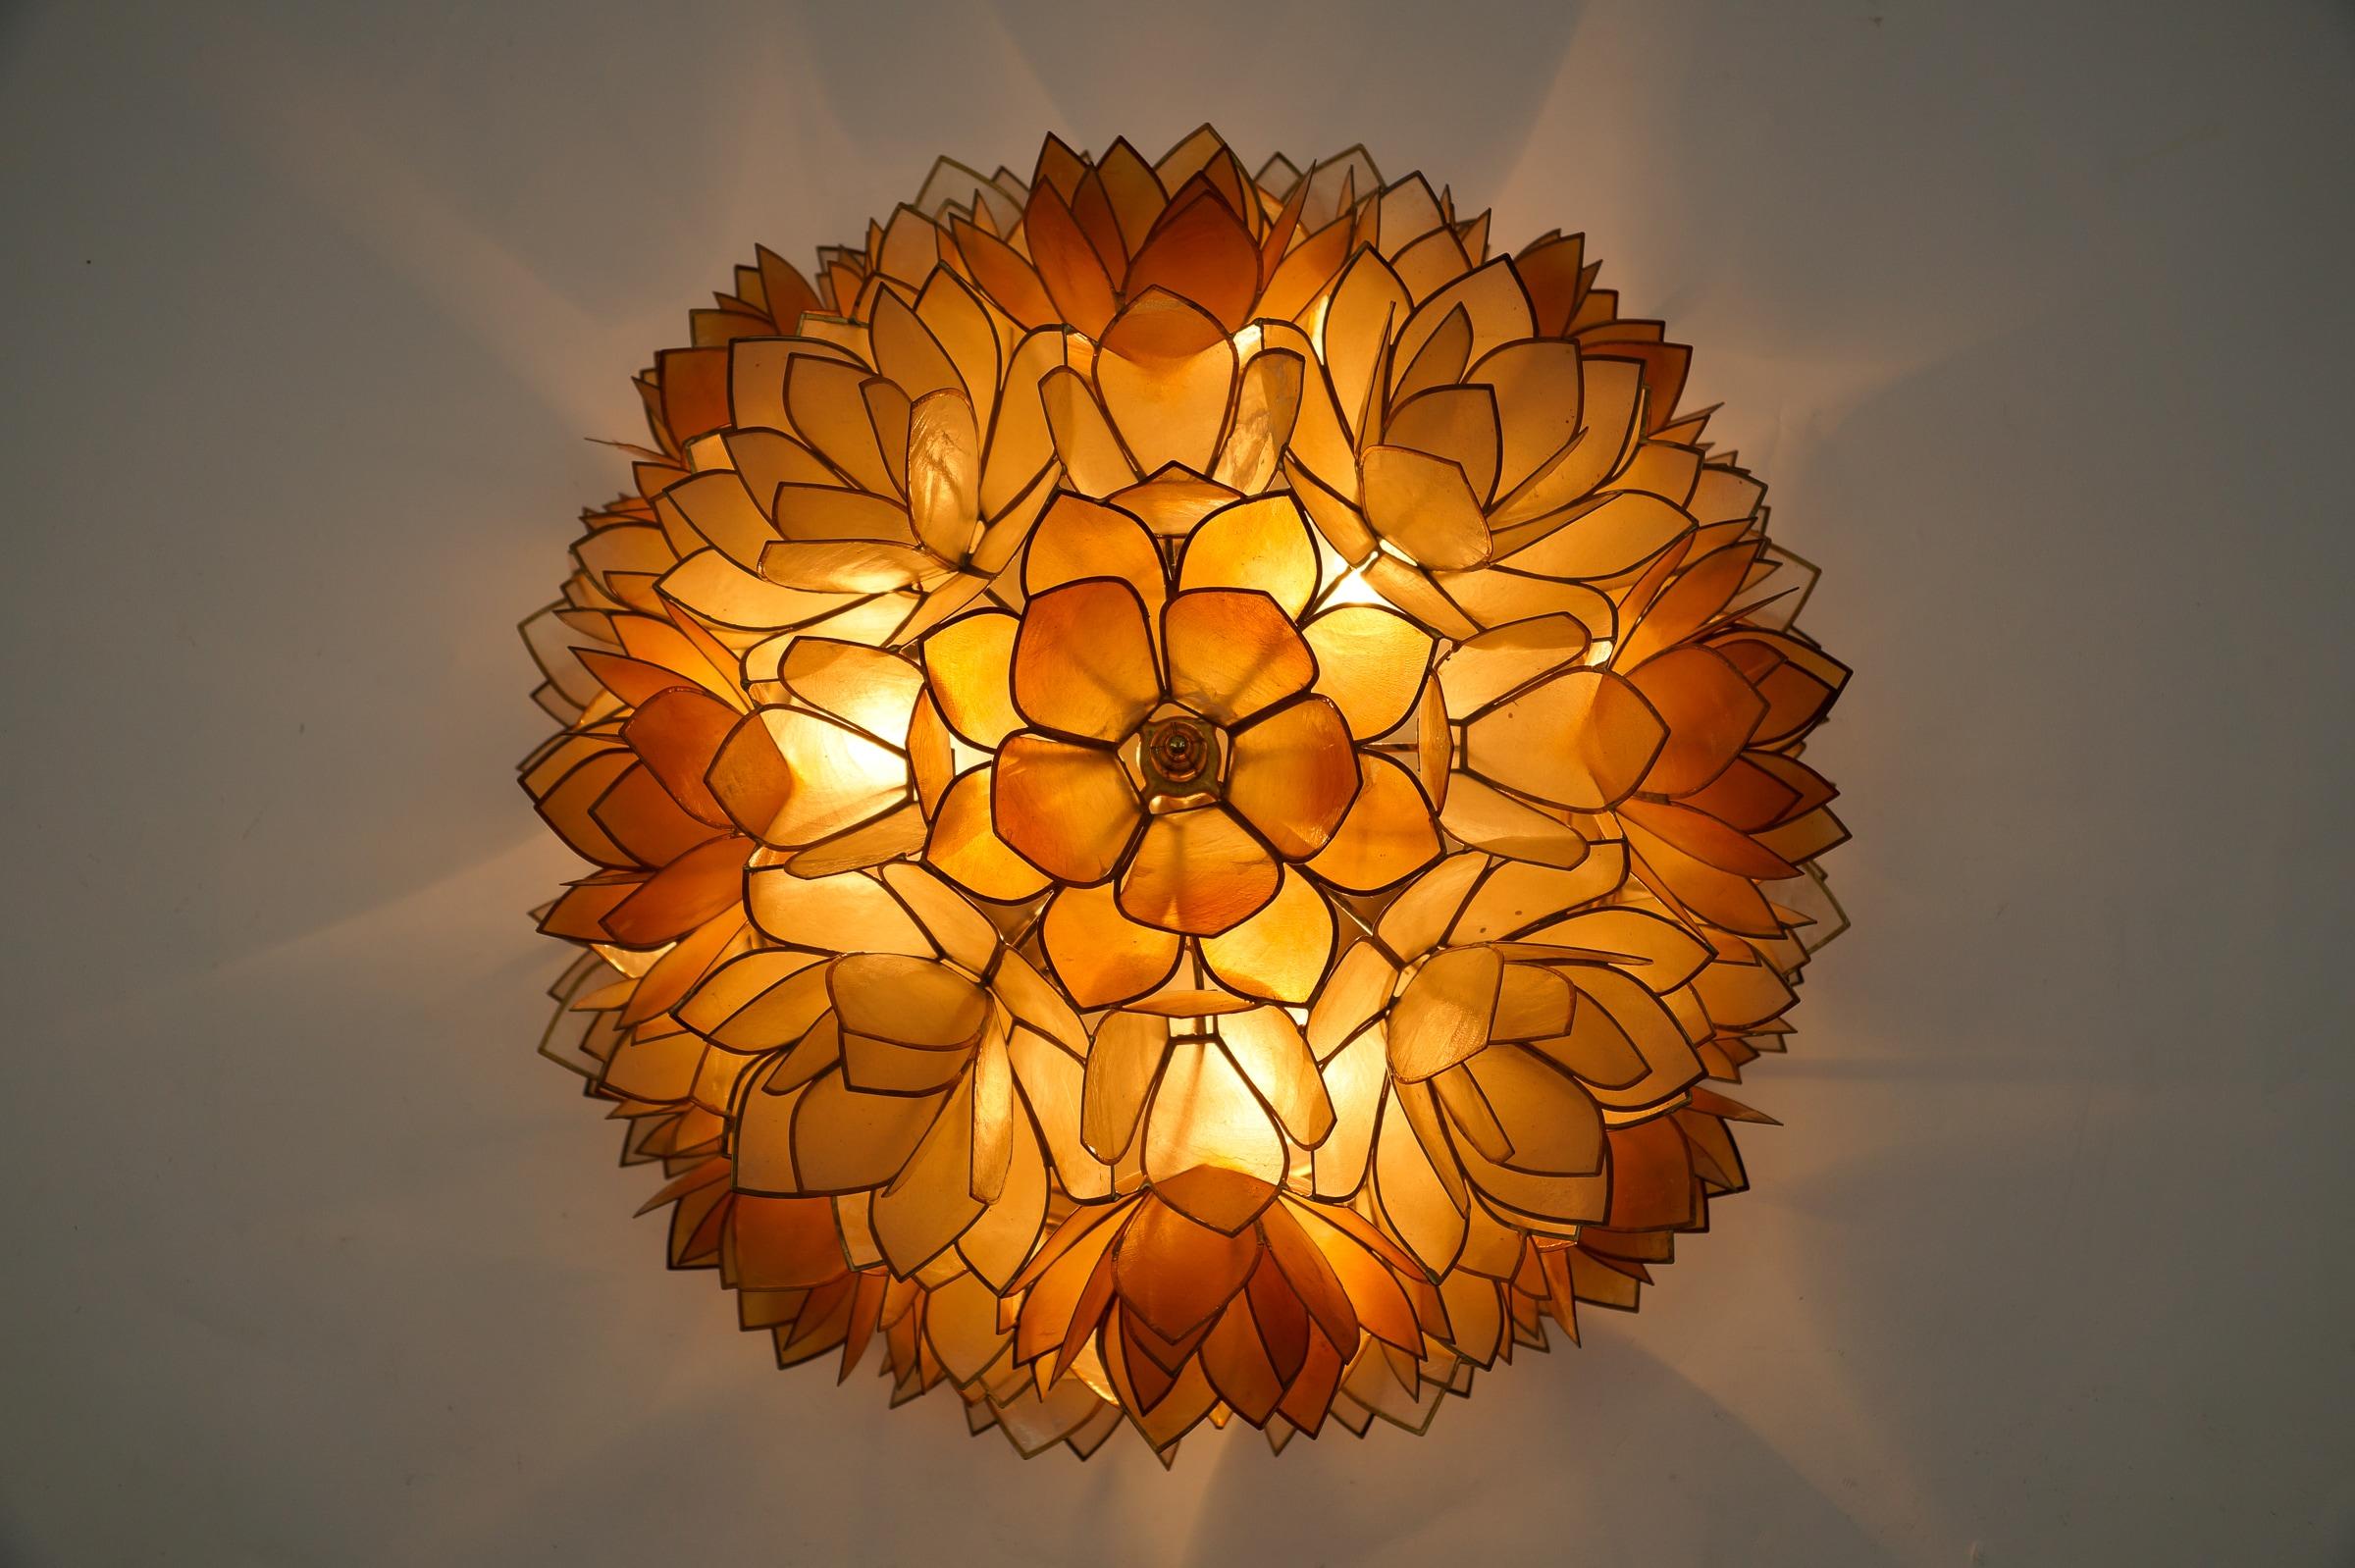 Flower Spherical Wall or Ceiling Lamps Made of Mother-of-Pearl in Orange, 1960s For Sale 2